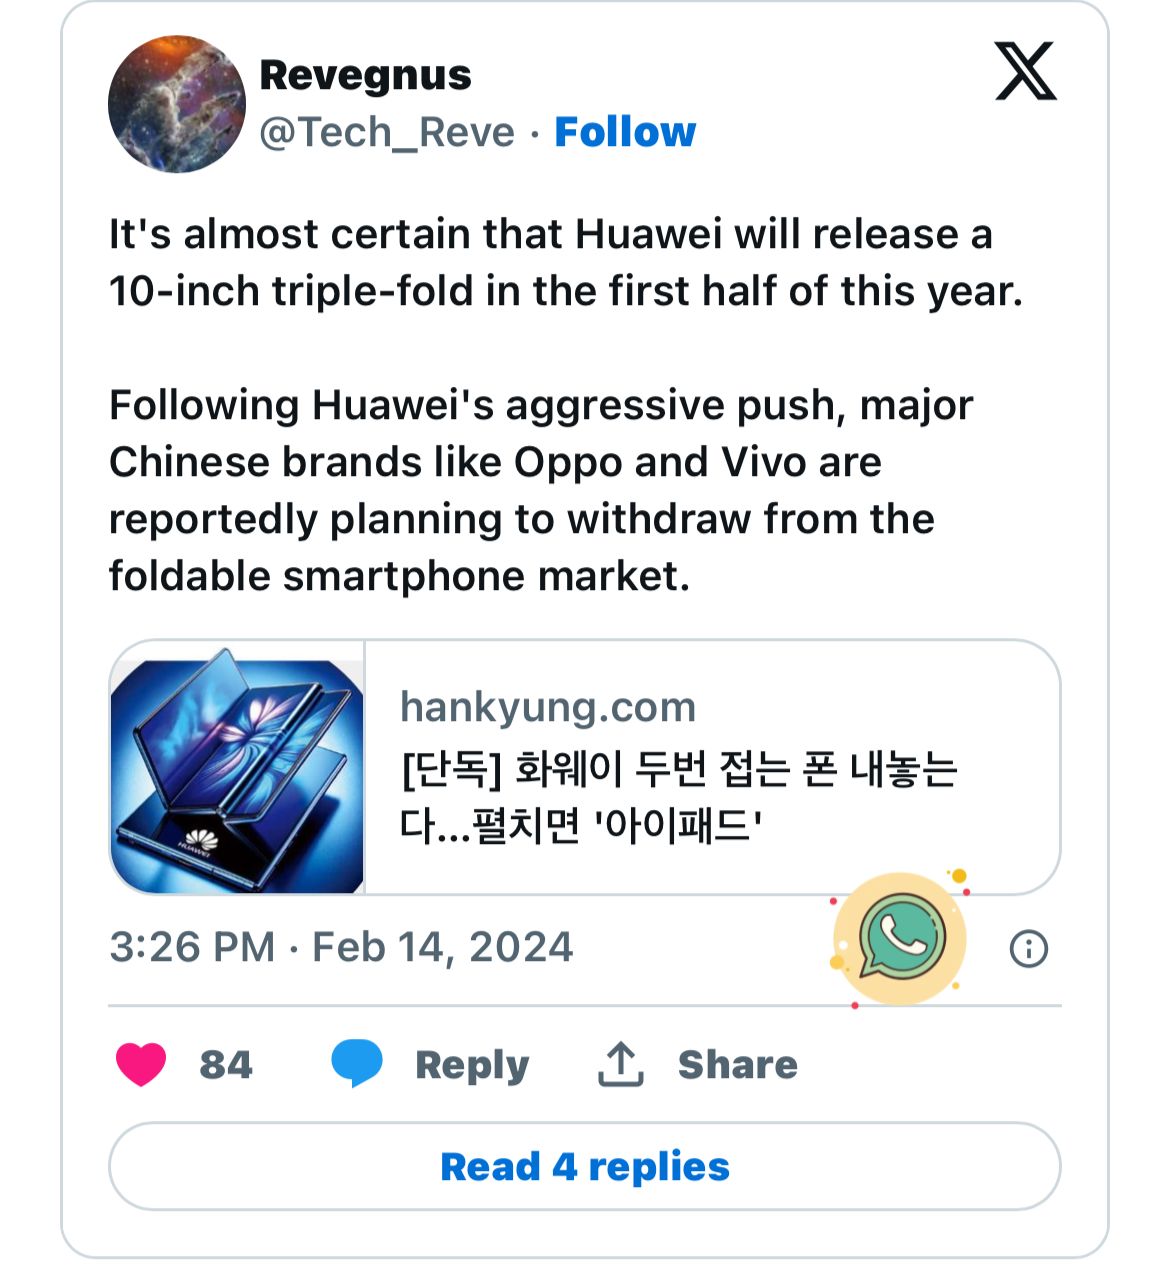 Oppo and Vivo considering exiting the foldable phone market